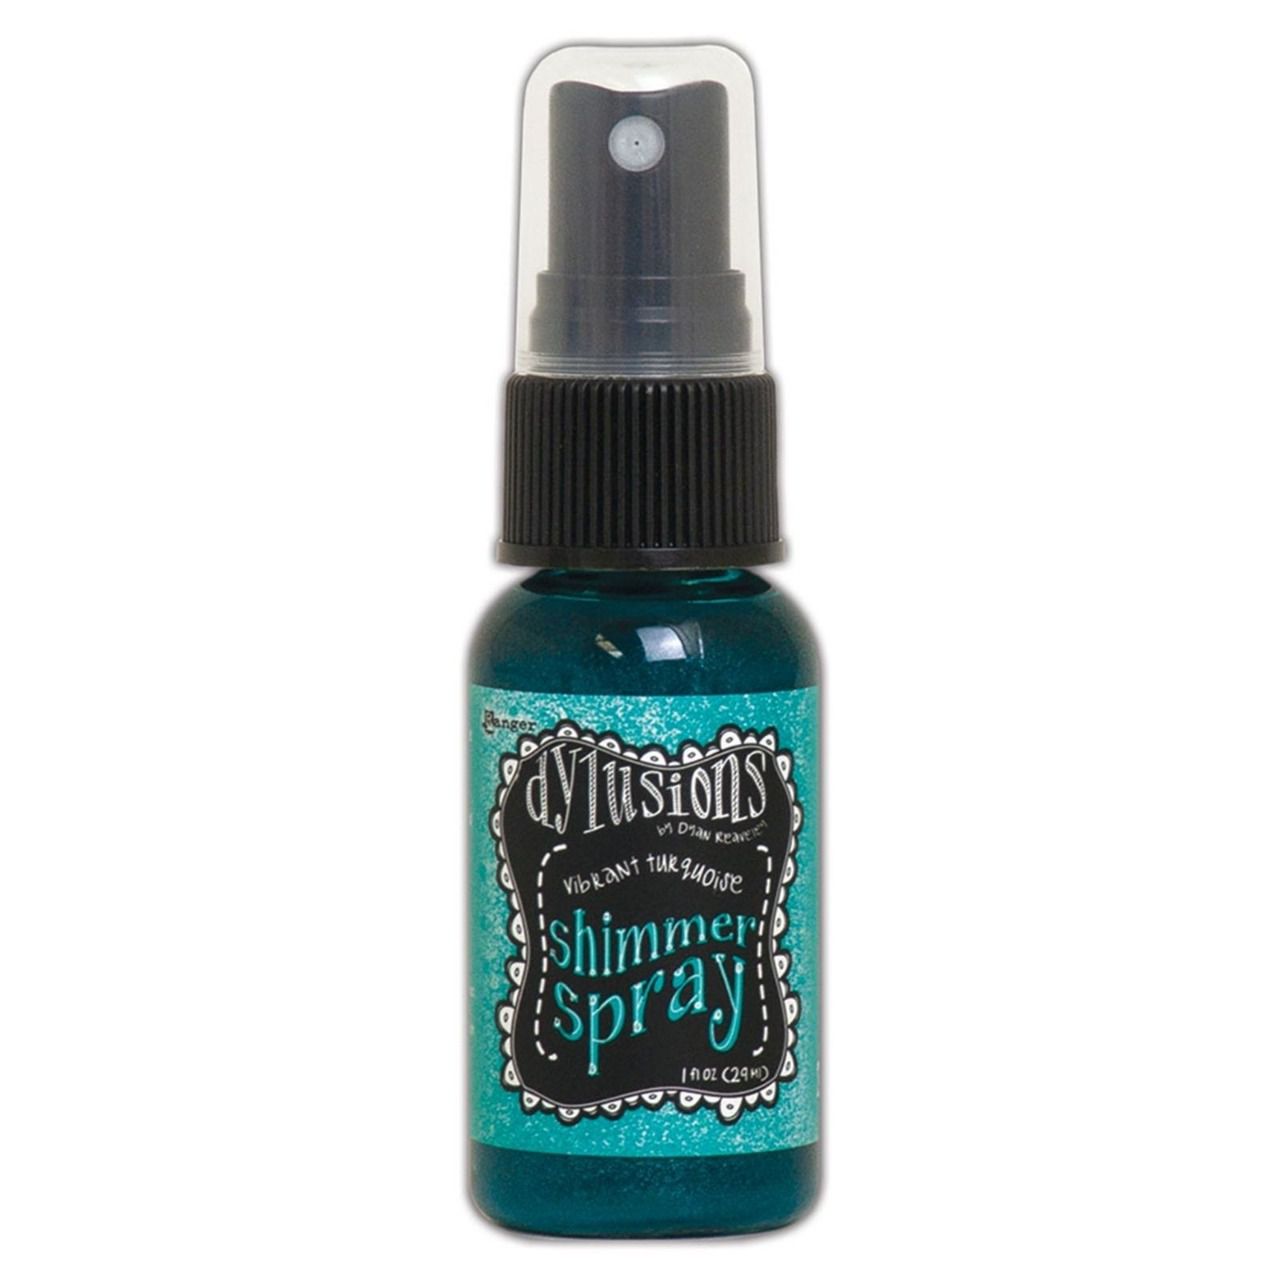 Shimmer Spray Dylusions - Vibrant turquoise - 29ml